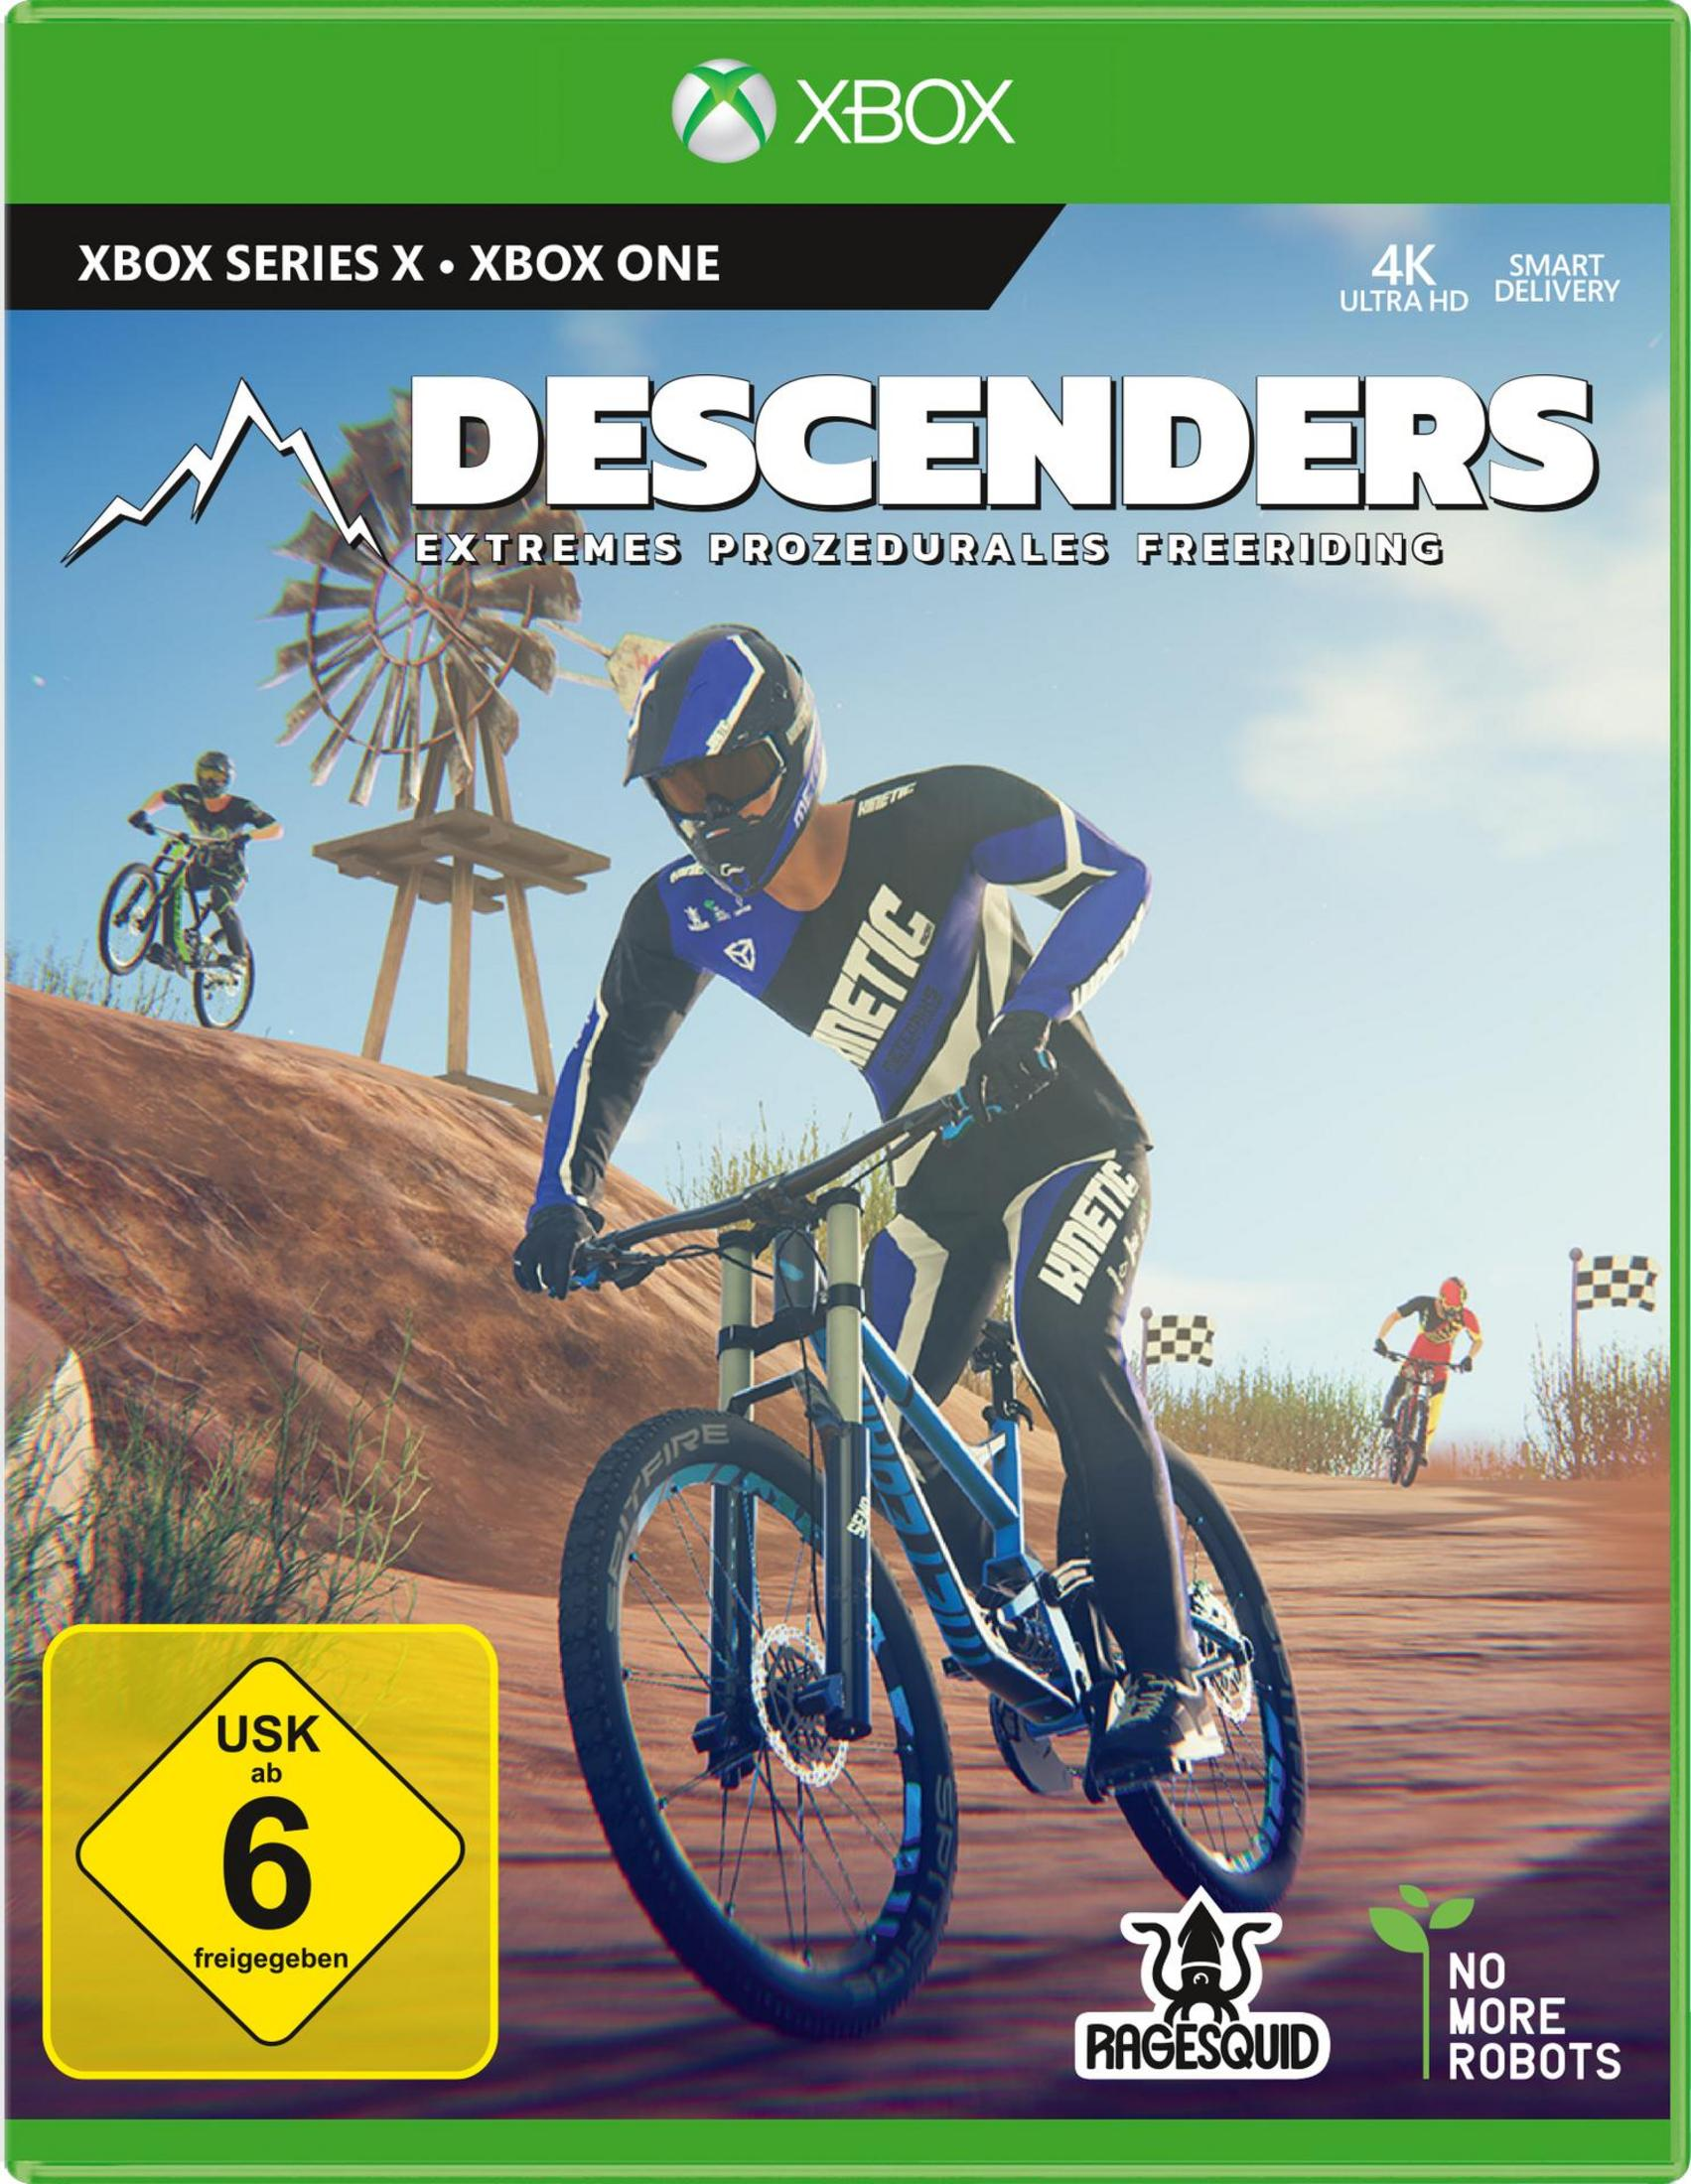 Descenders XBSX One] [Xbox -